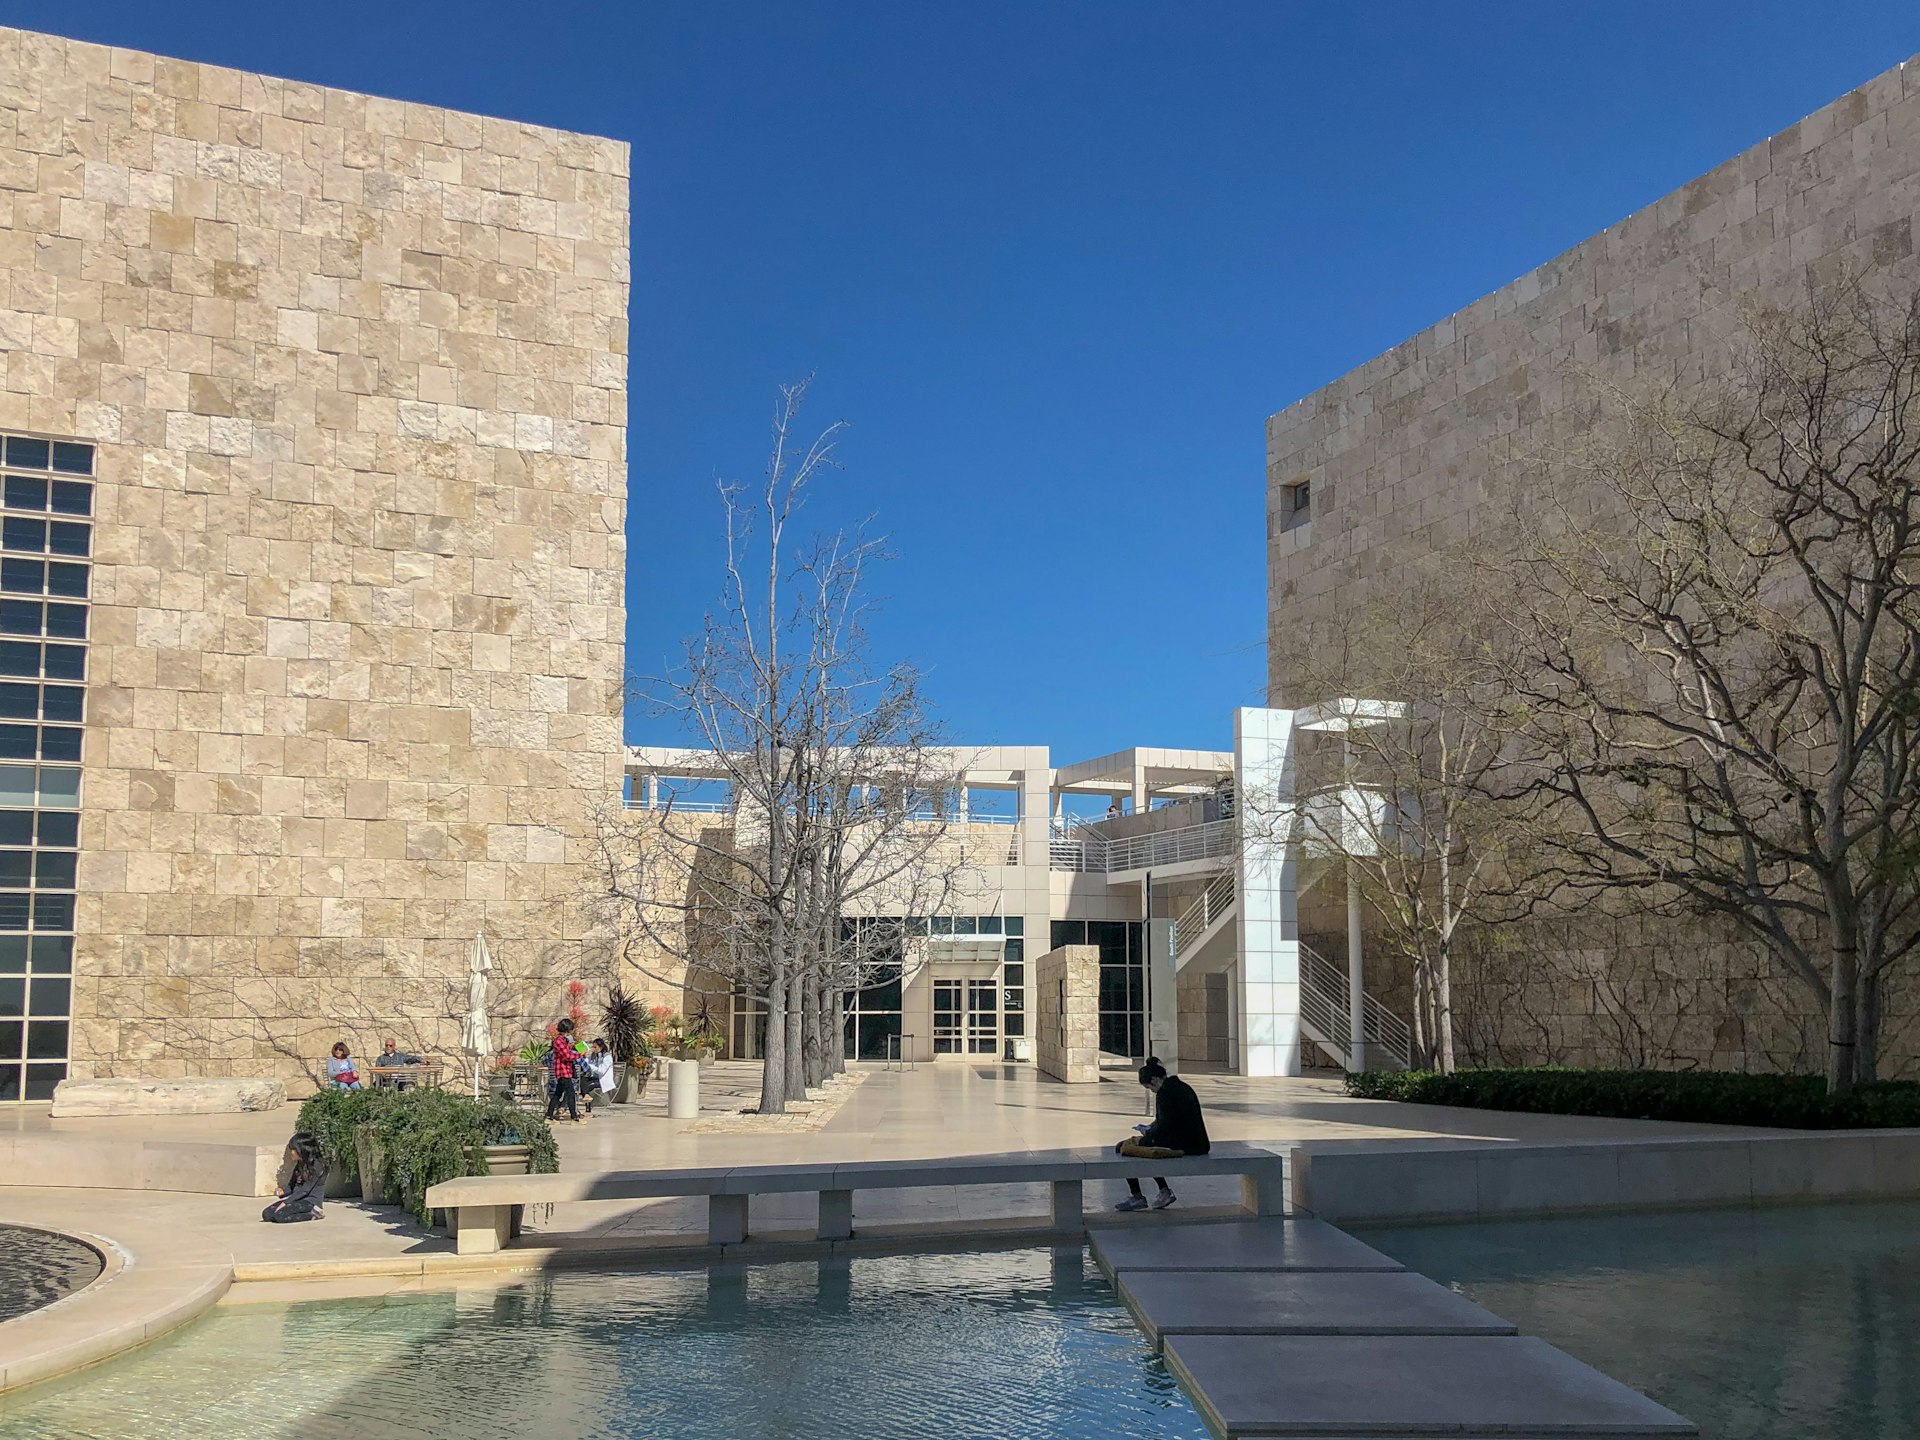 Exterior of the Getty museum in Los Angeles